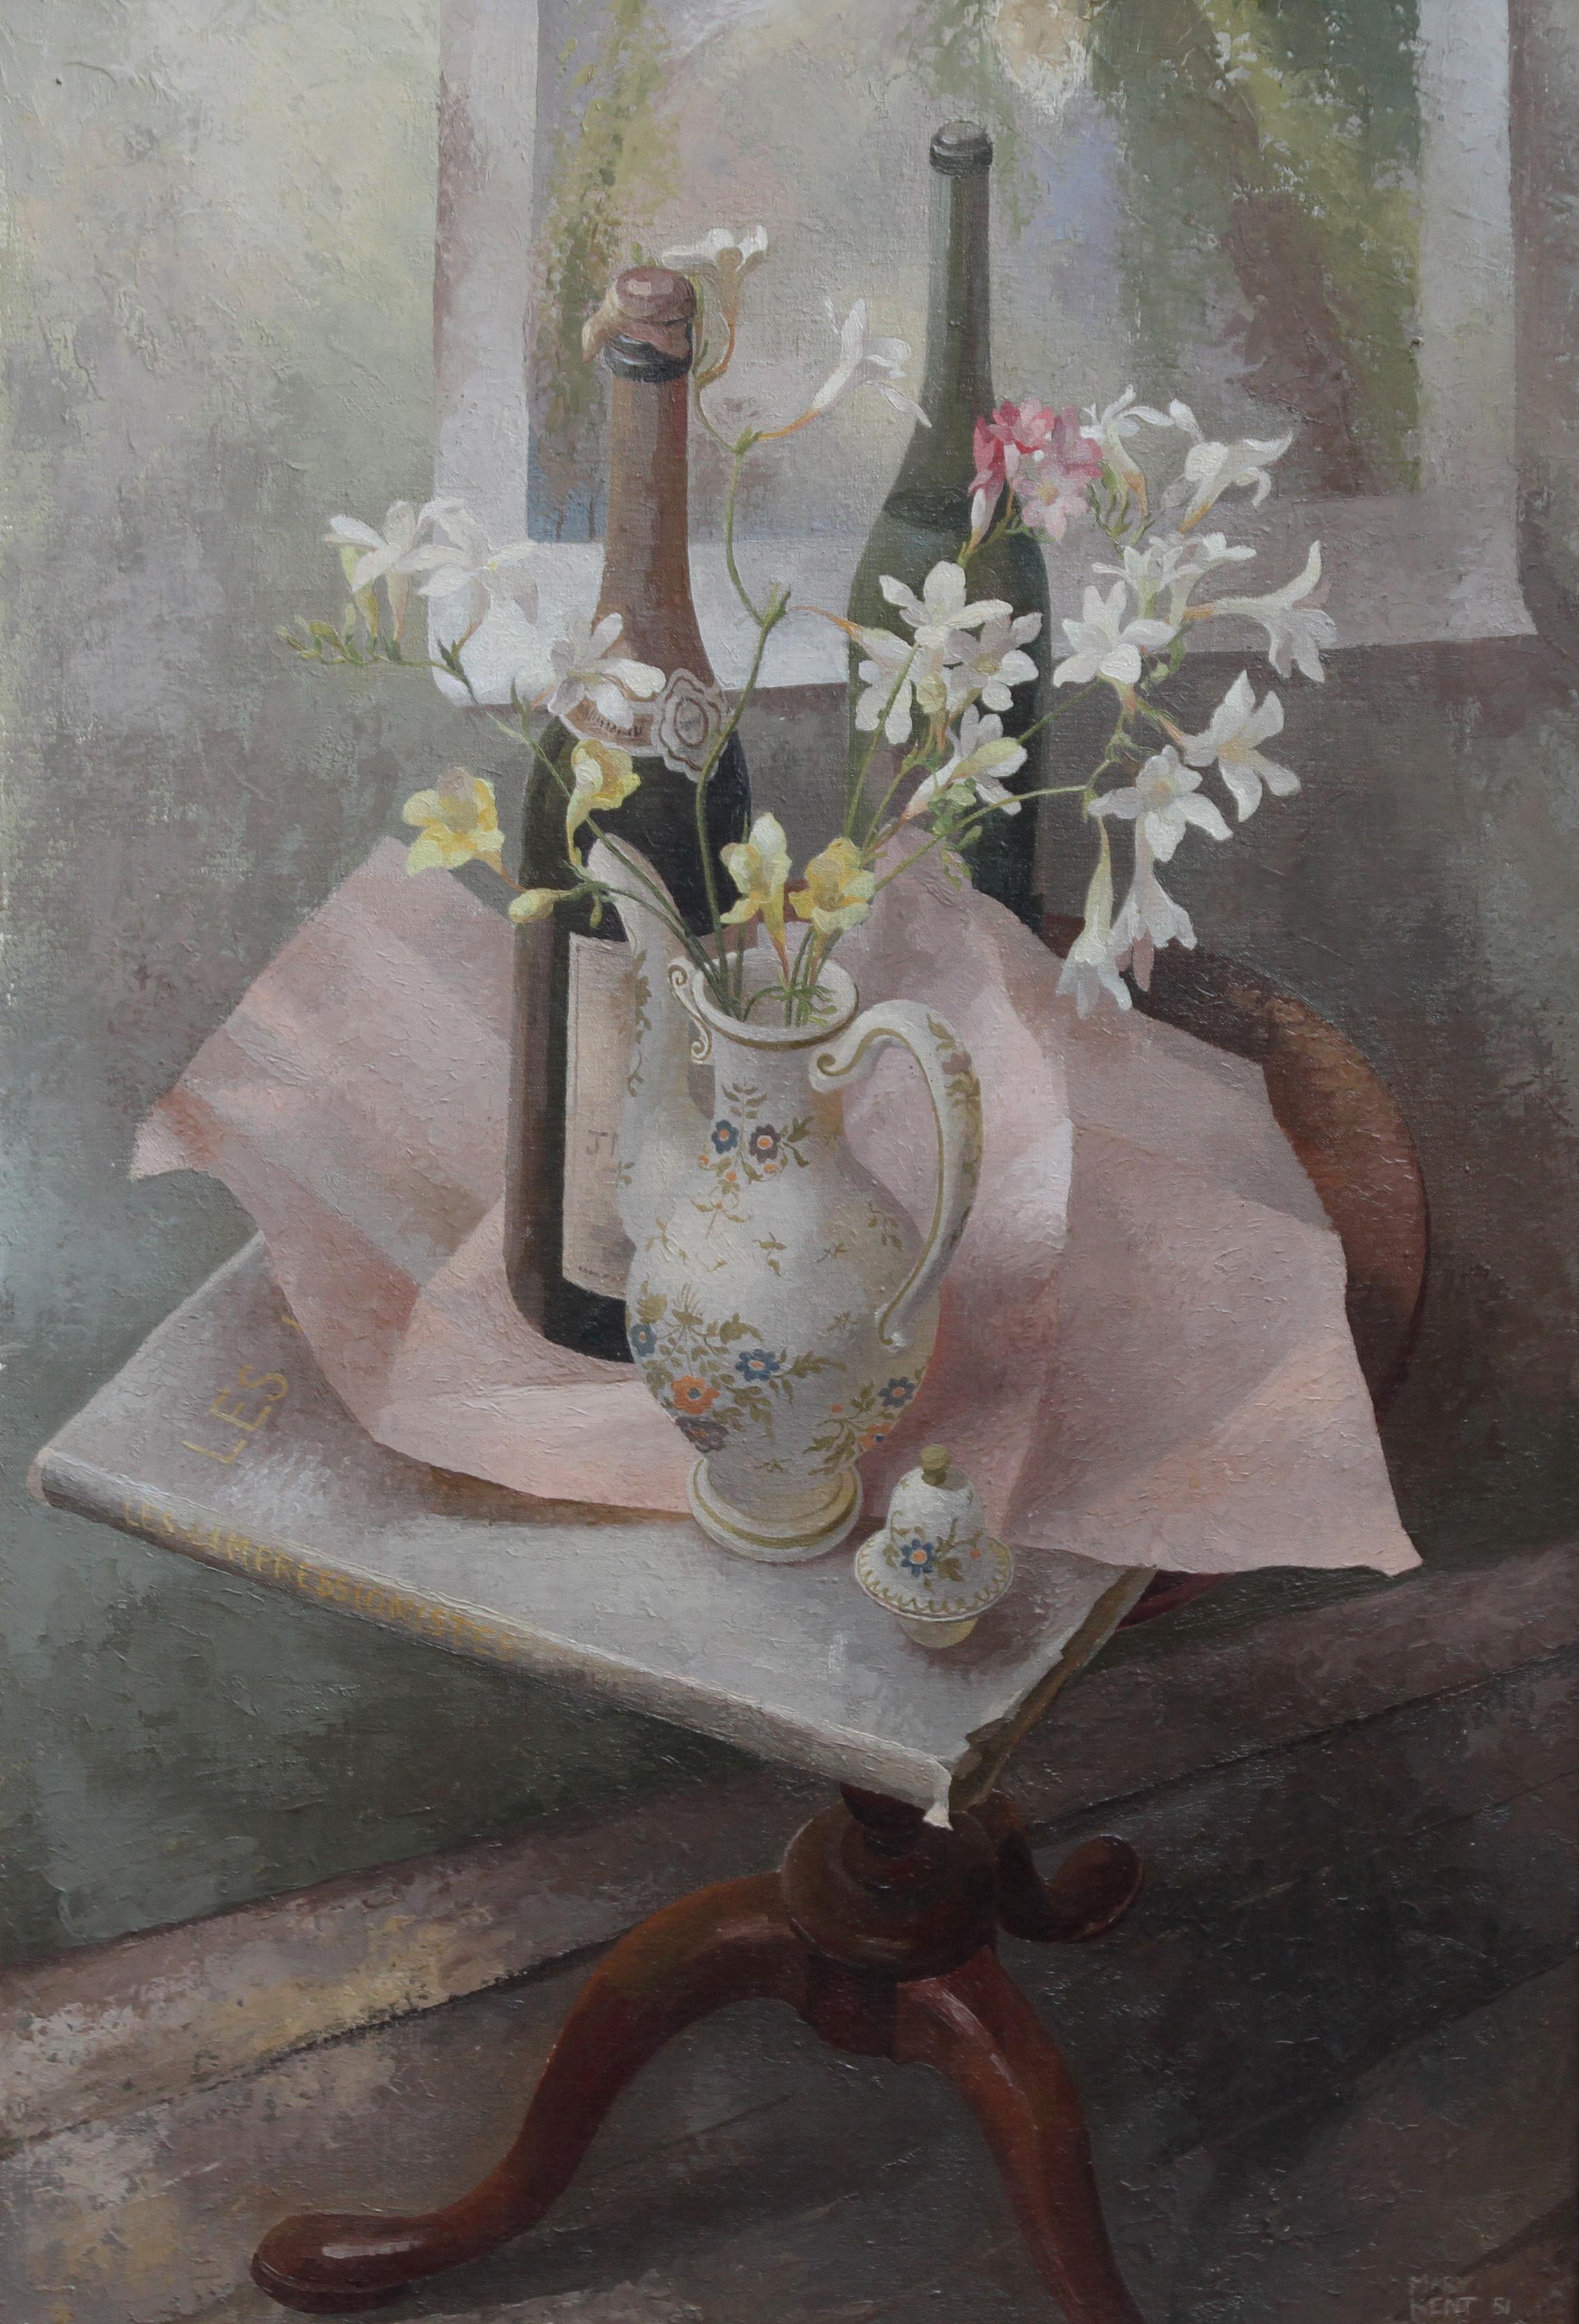 French Coffee Pot - British exh art 1960s floral still life oil painting flowers For Sale 5